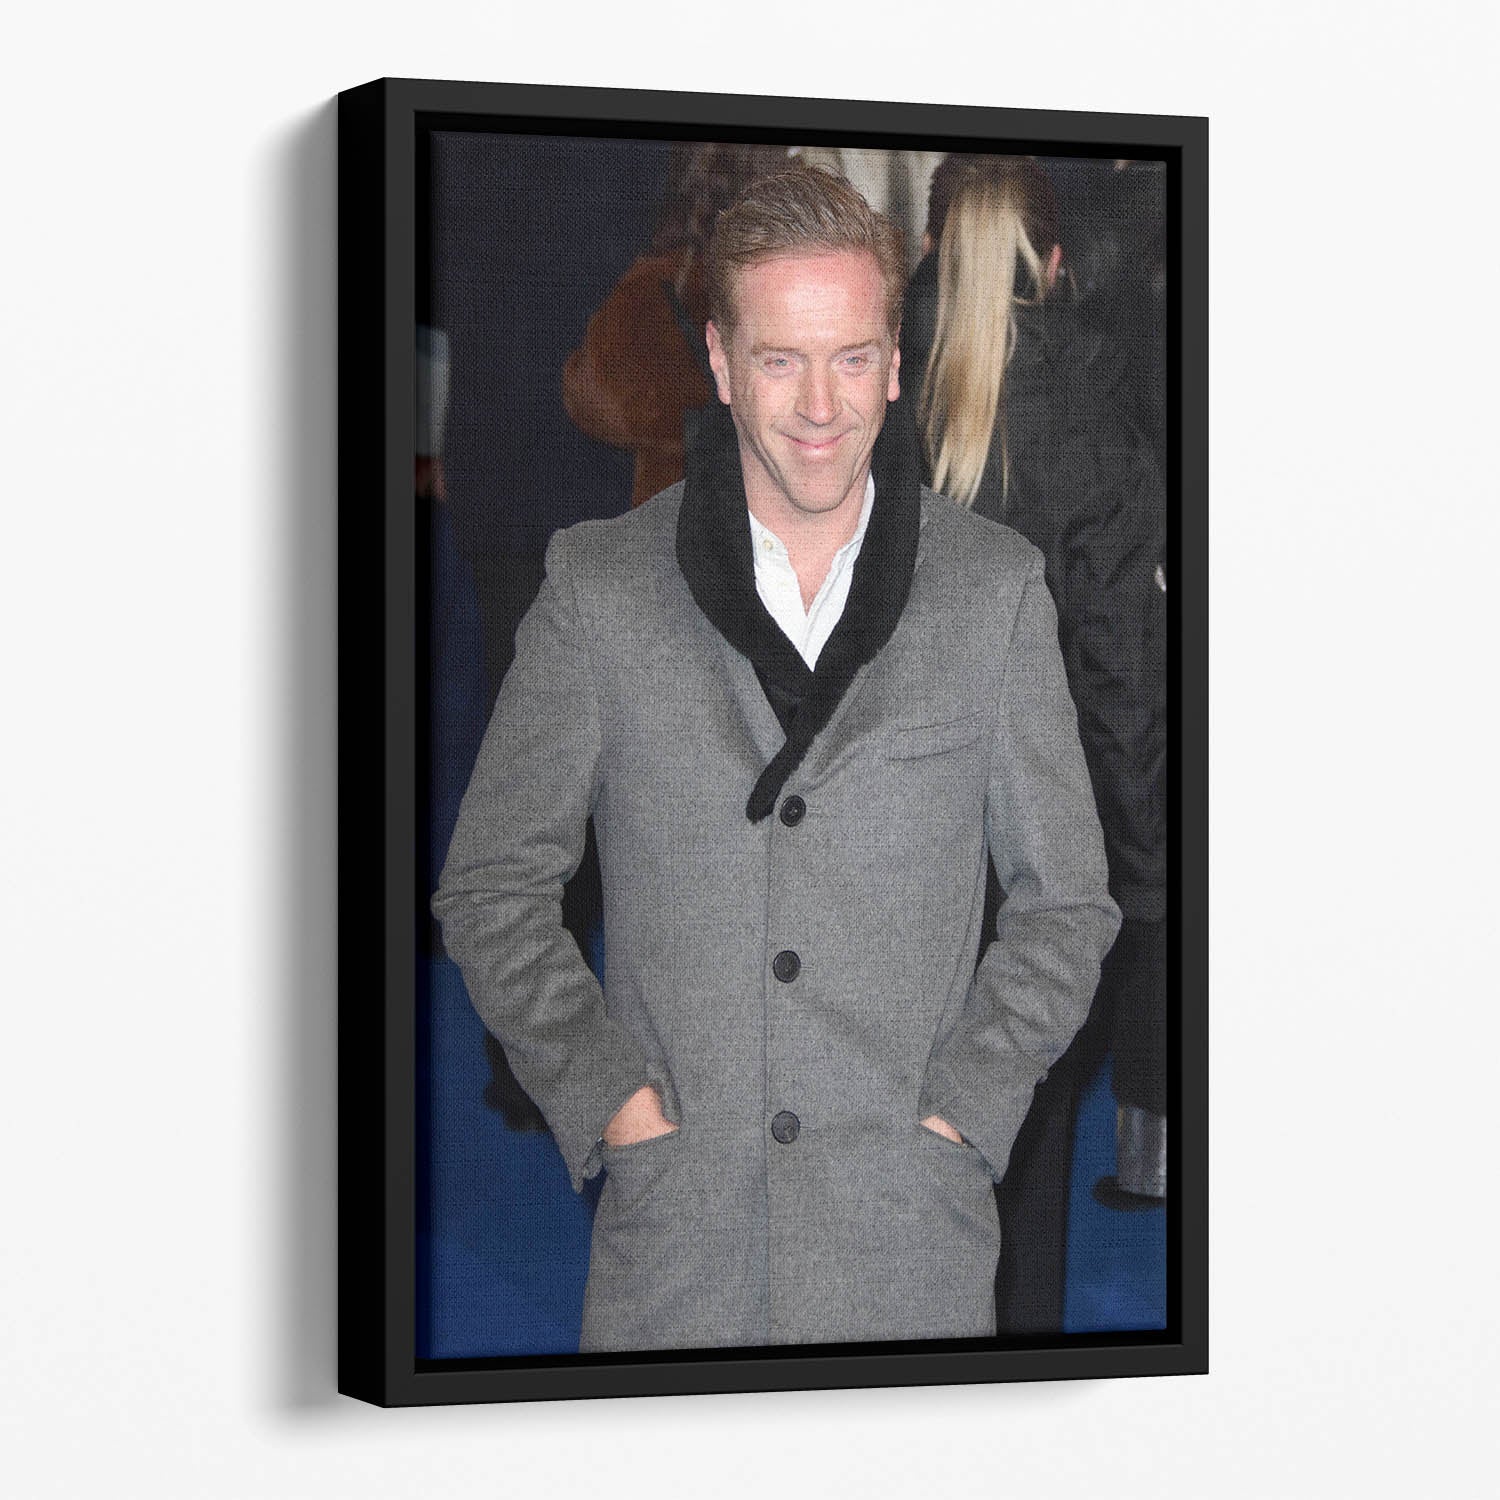 Damian Lewis on the red carpet Floating Framed Canvas